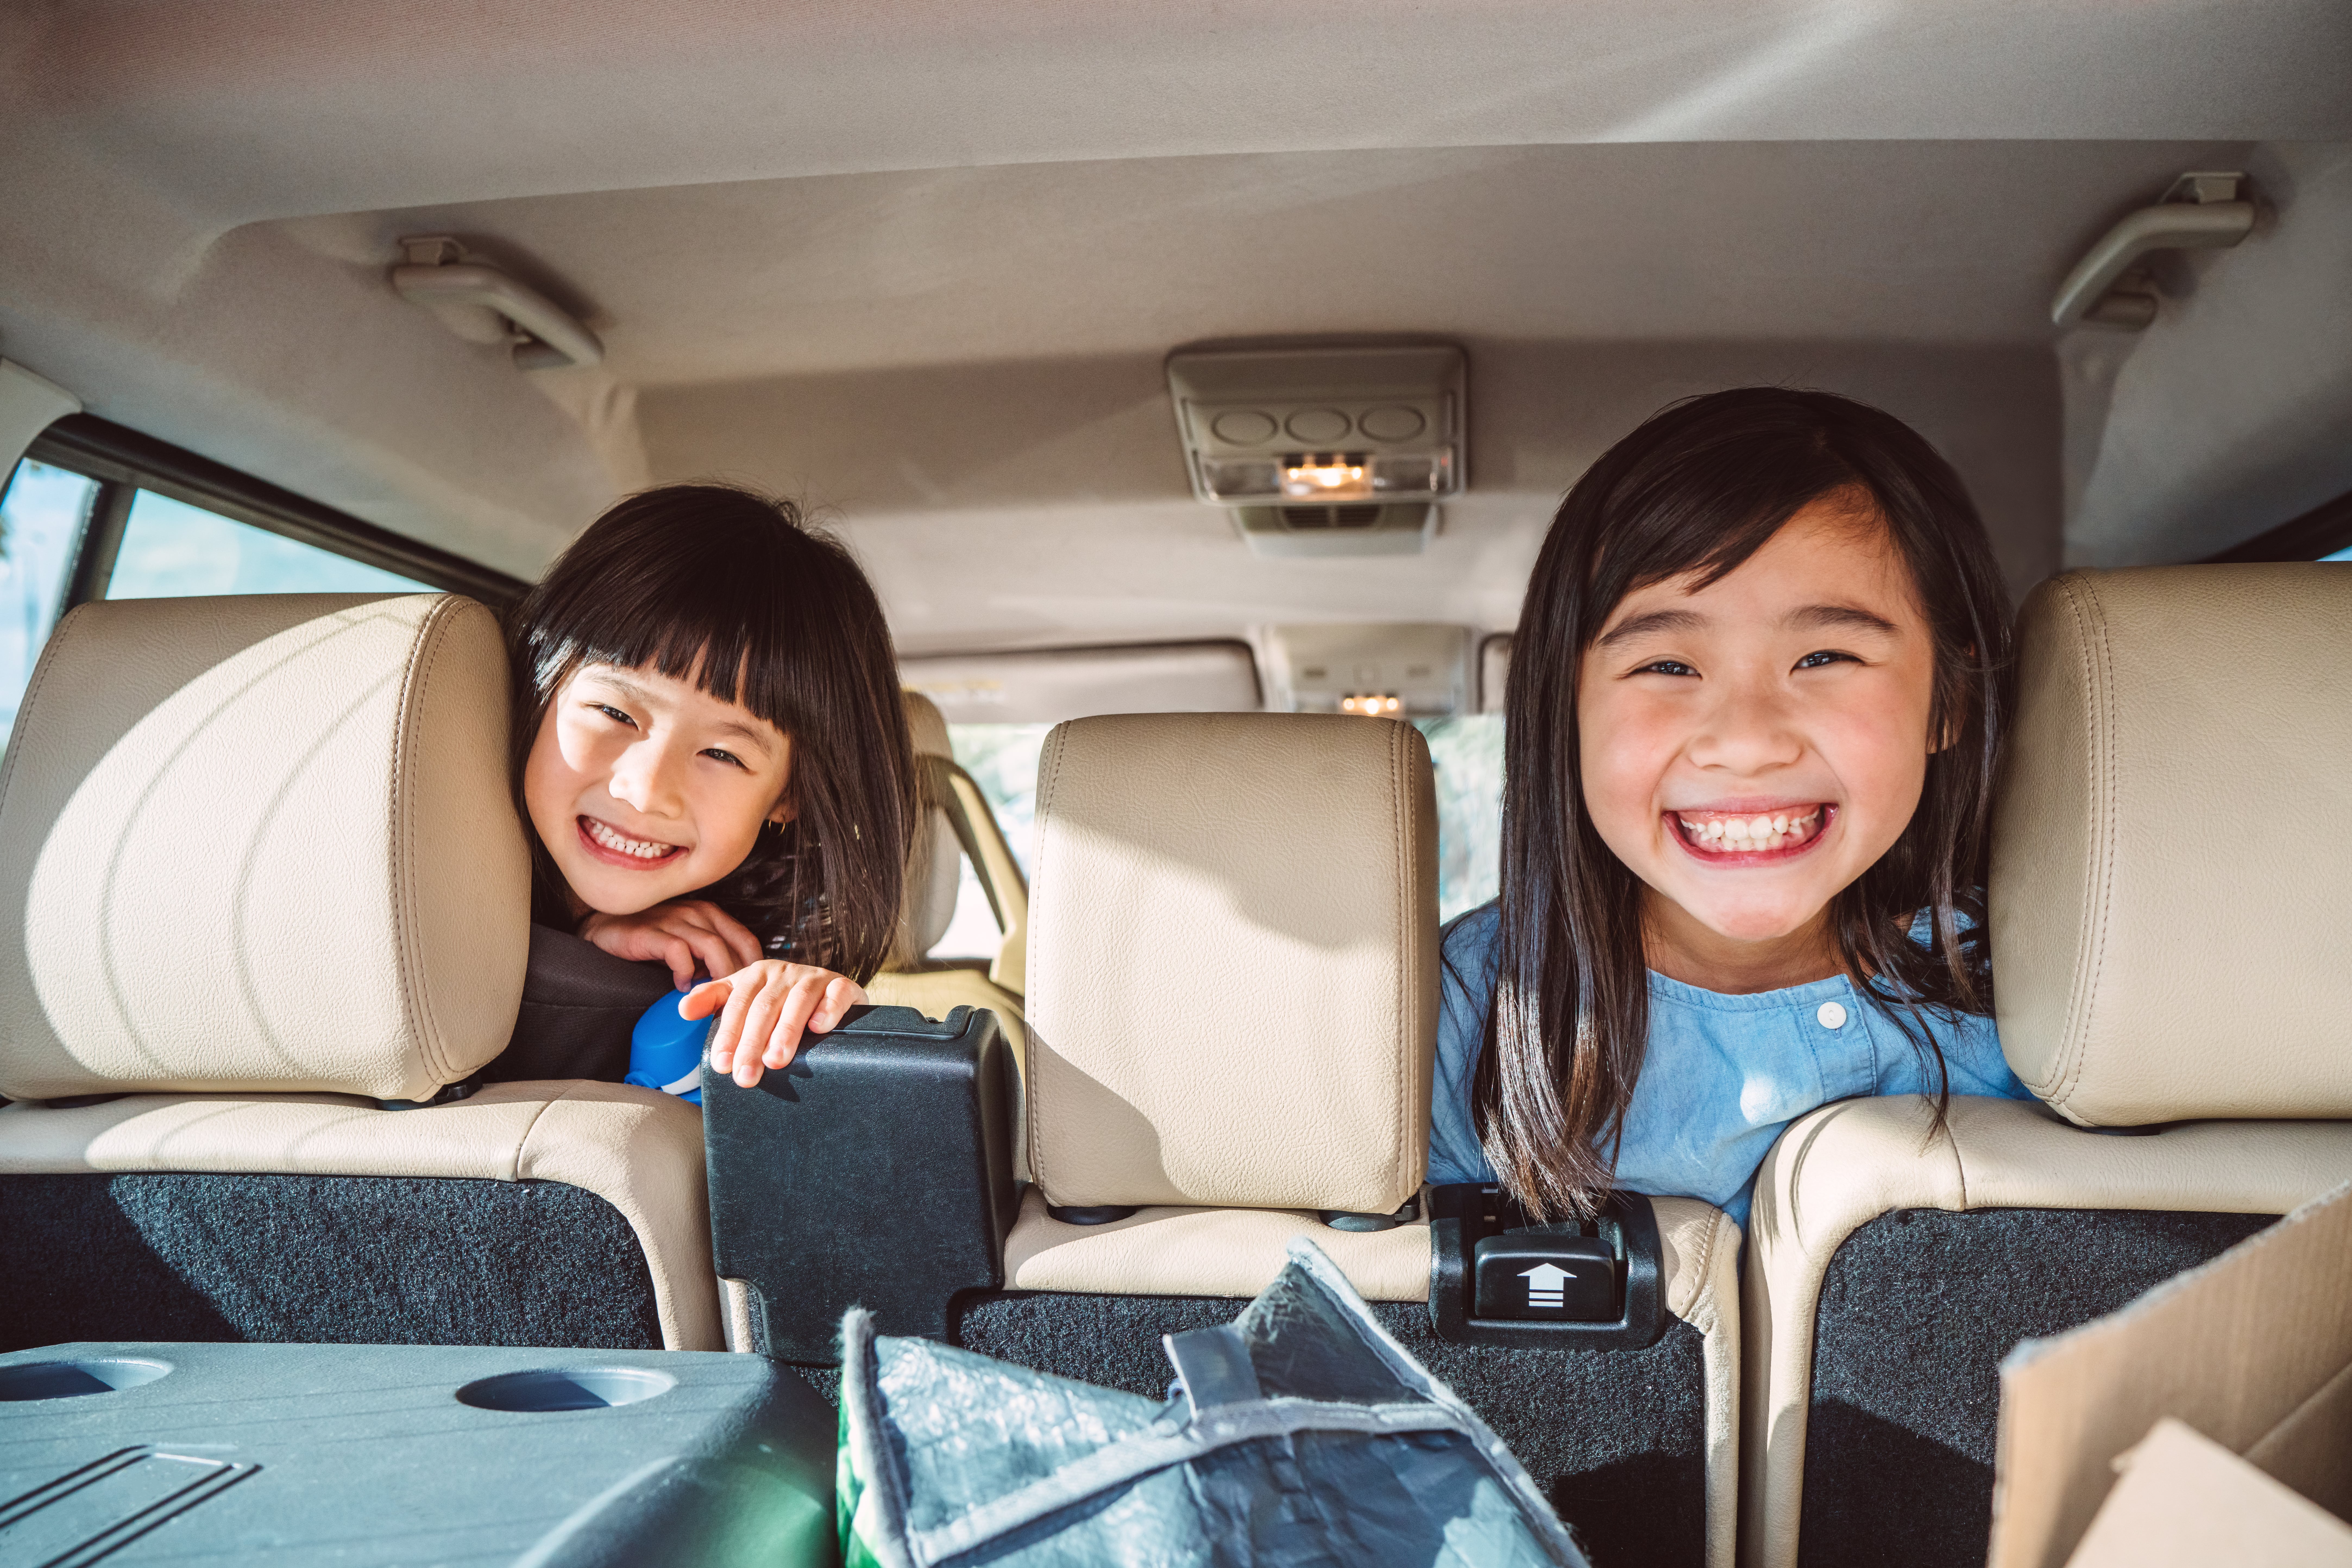 Top 5 road trip games for kids  Fun Things to Do in the Car with Kids 